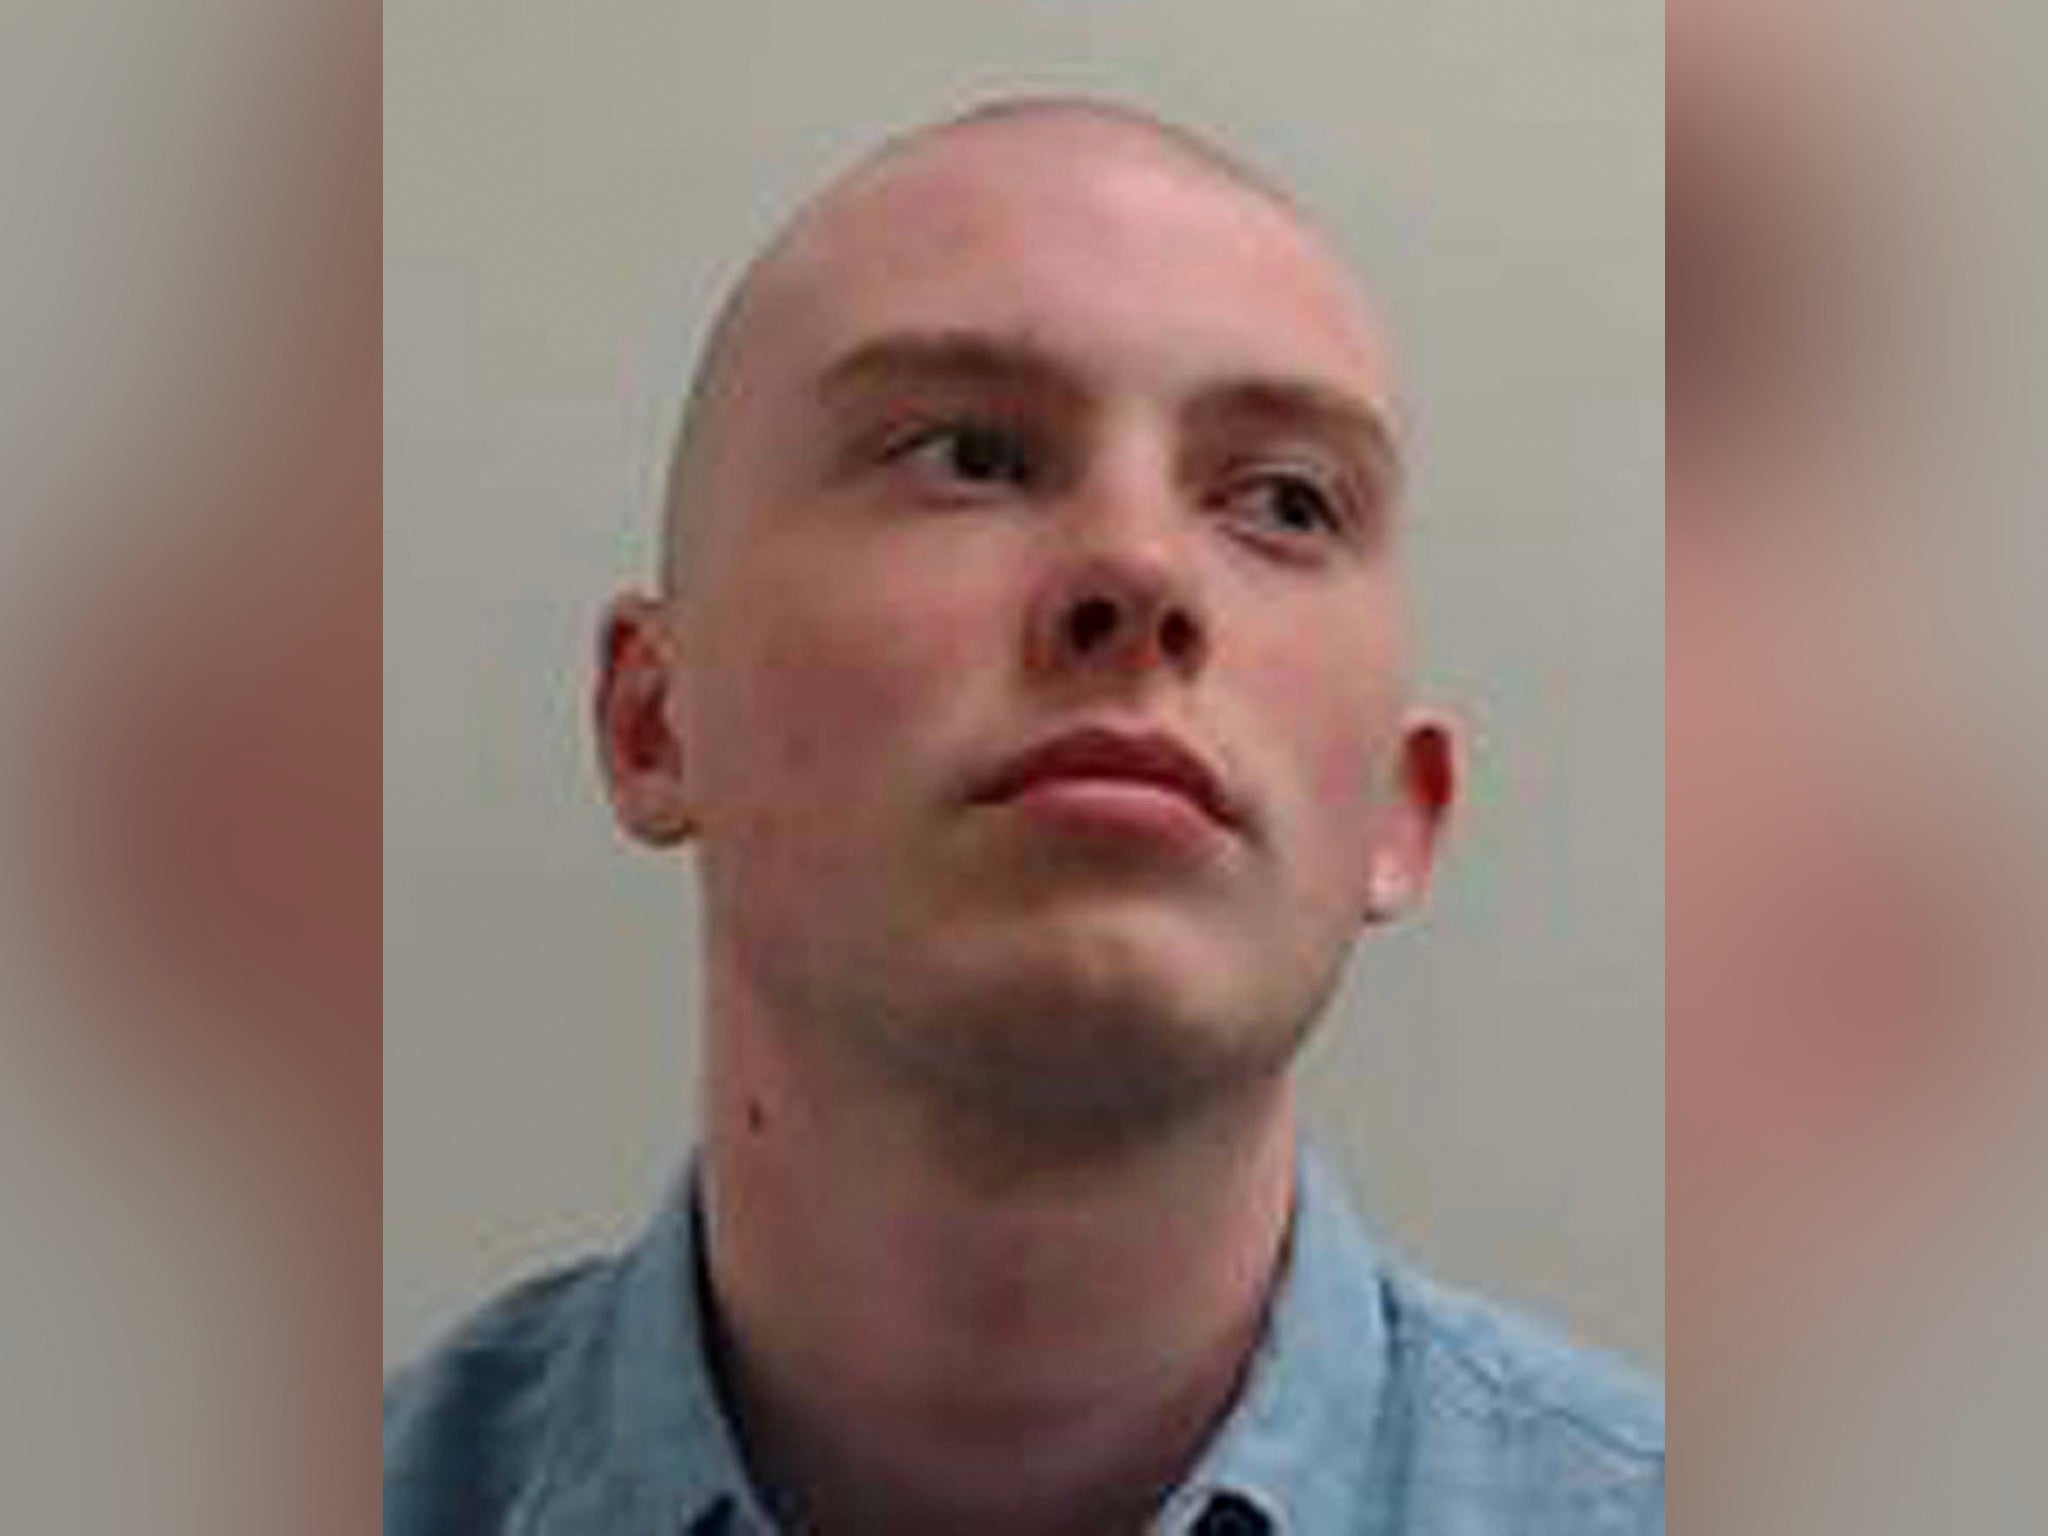 Ewan Fulton, 20, has been sentenced to 38 months in prison for plying a 15-year-old girl with alcohol and abandoning her to die on a hill on a cold winter night